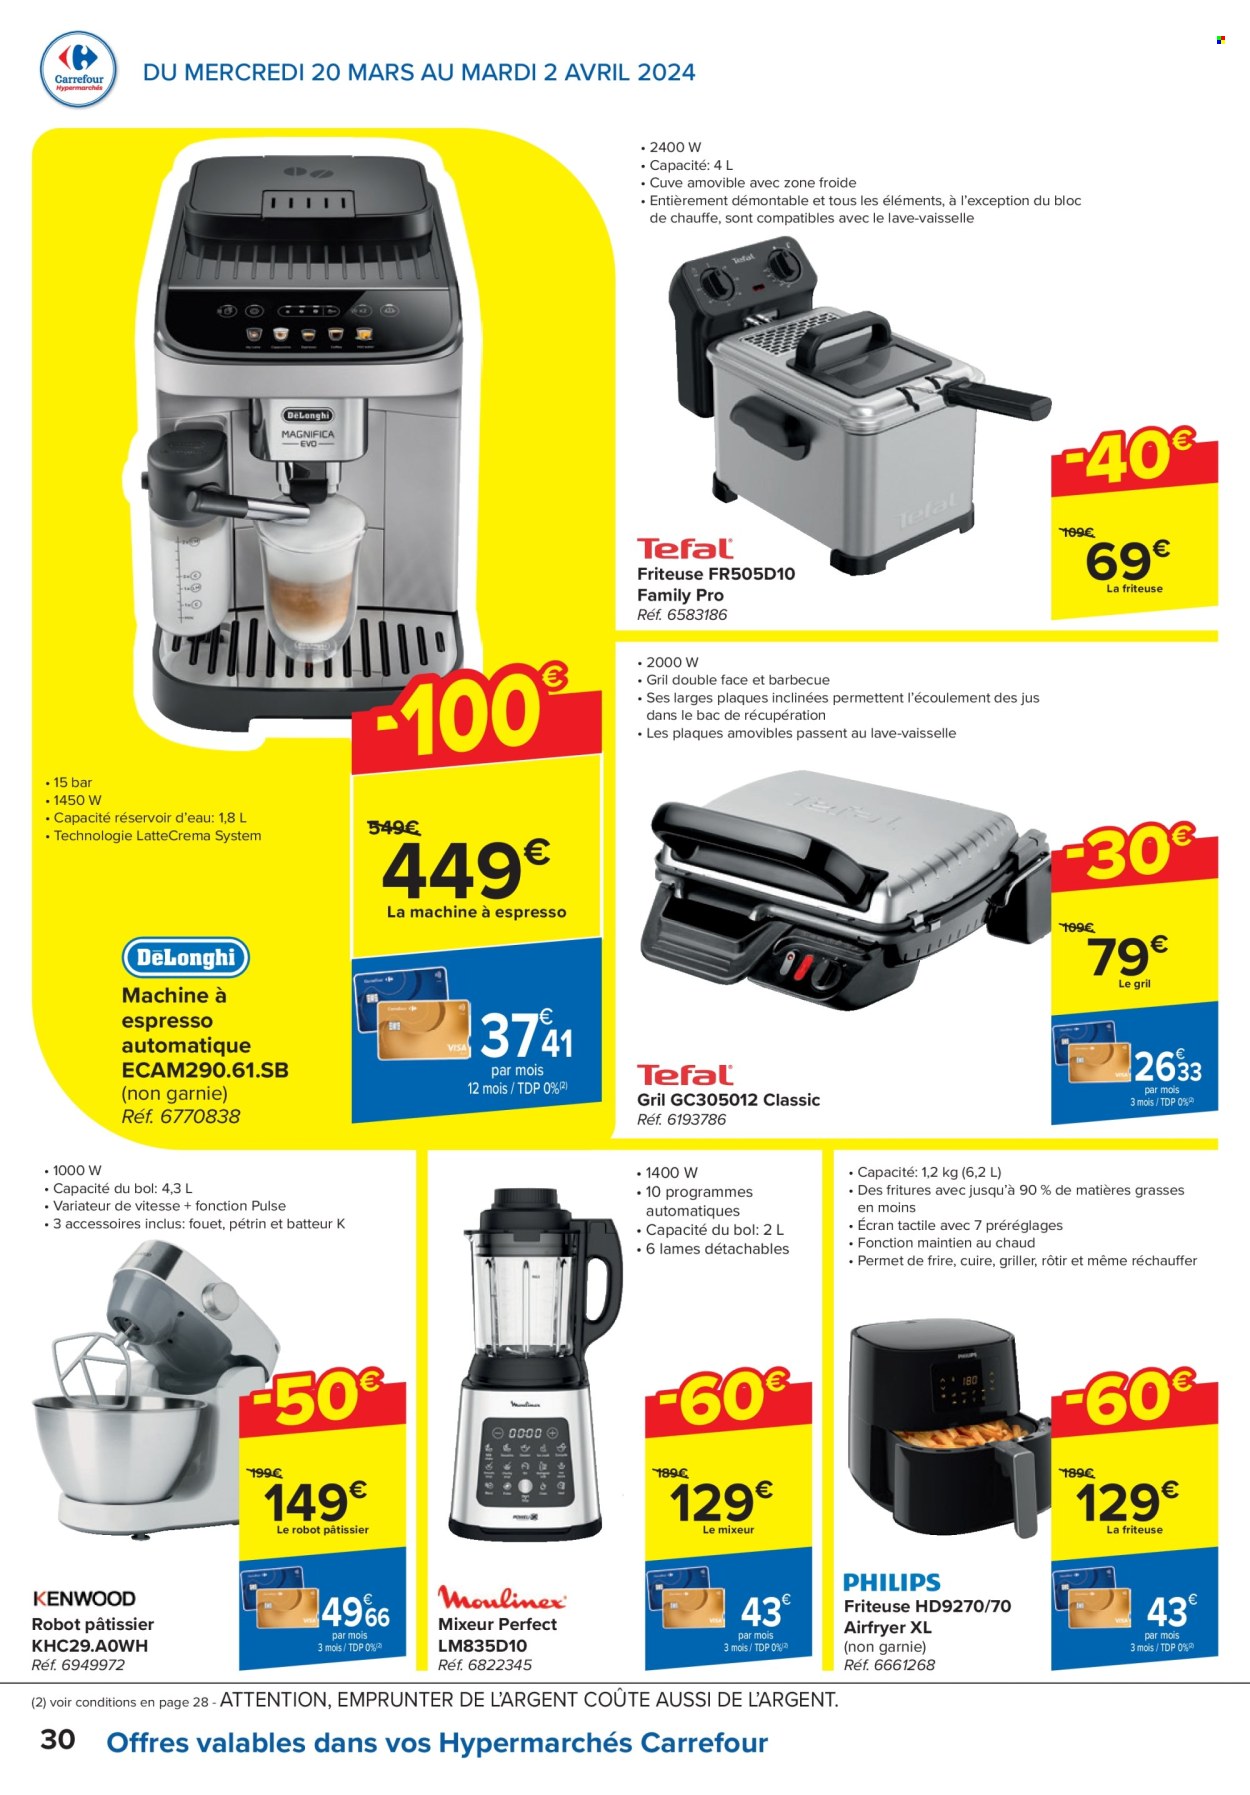 Catalogue Carrefour hypermarkt - 20.3.2024 - 2.4.2024. Page 30.